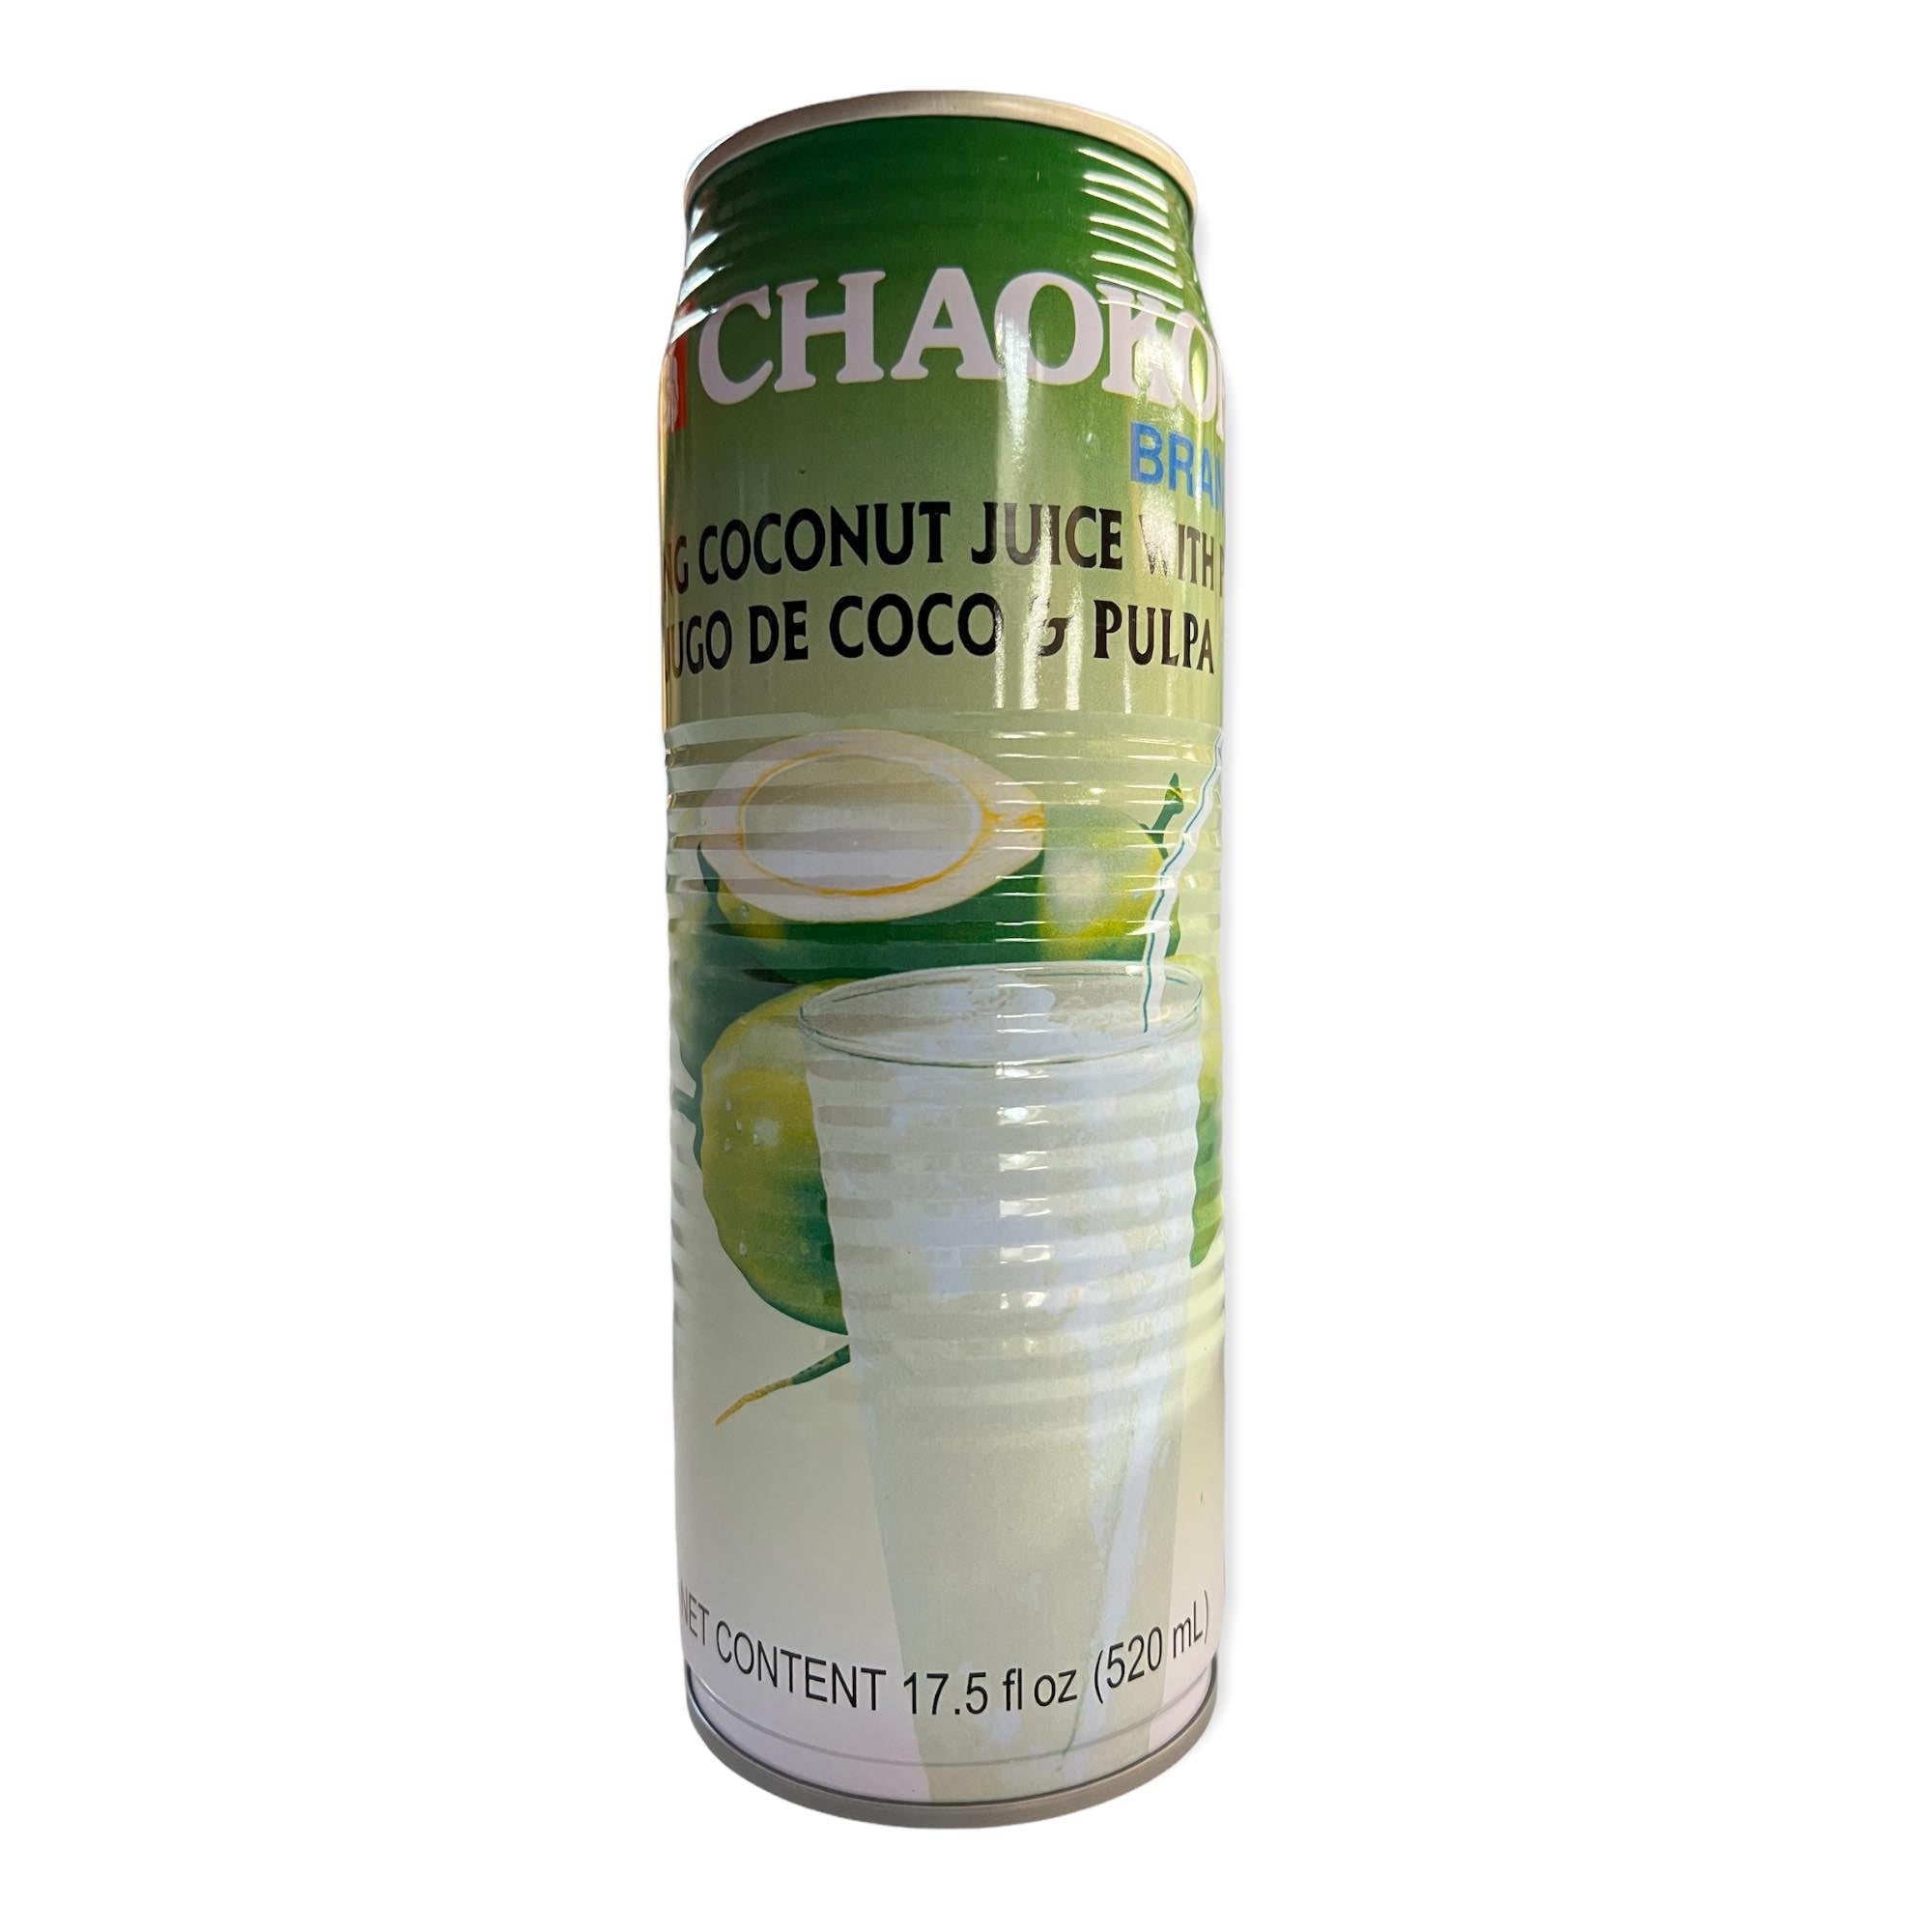 Chaokoh -Young Coconut Juice with Pulp / Meat - 520 ML